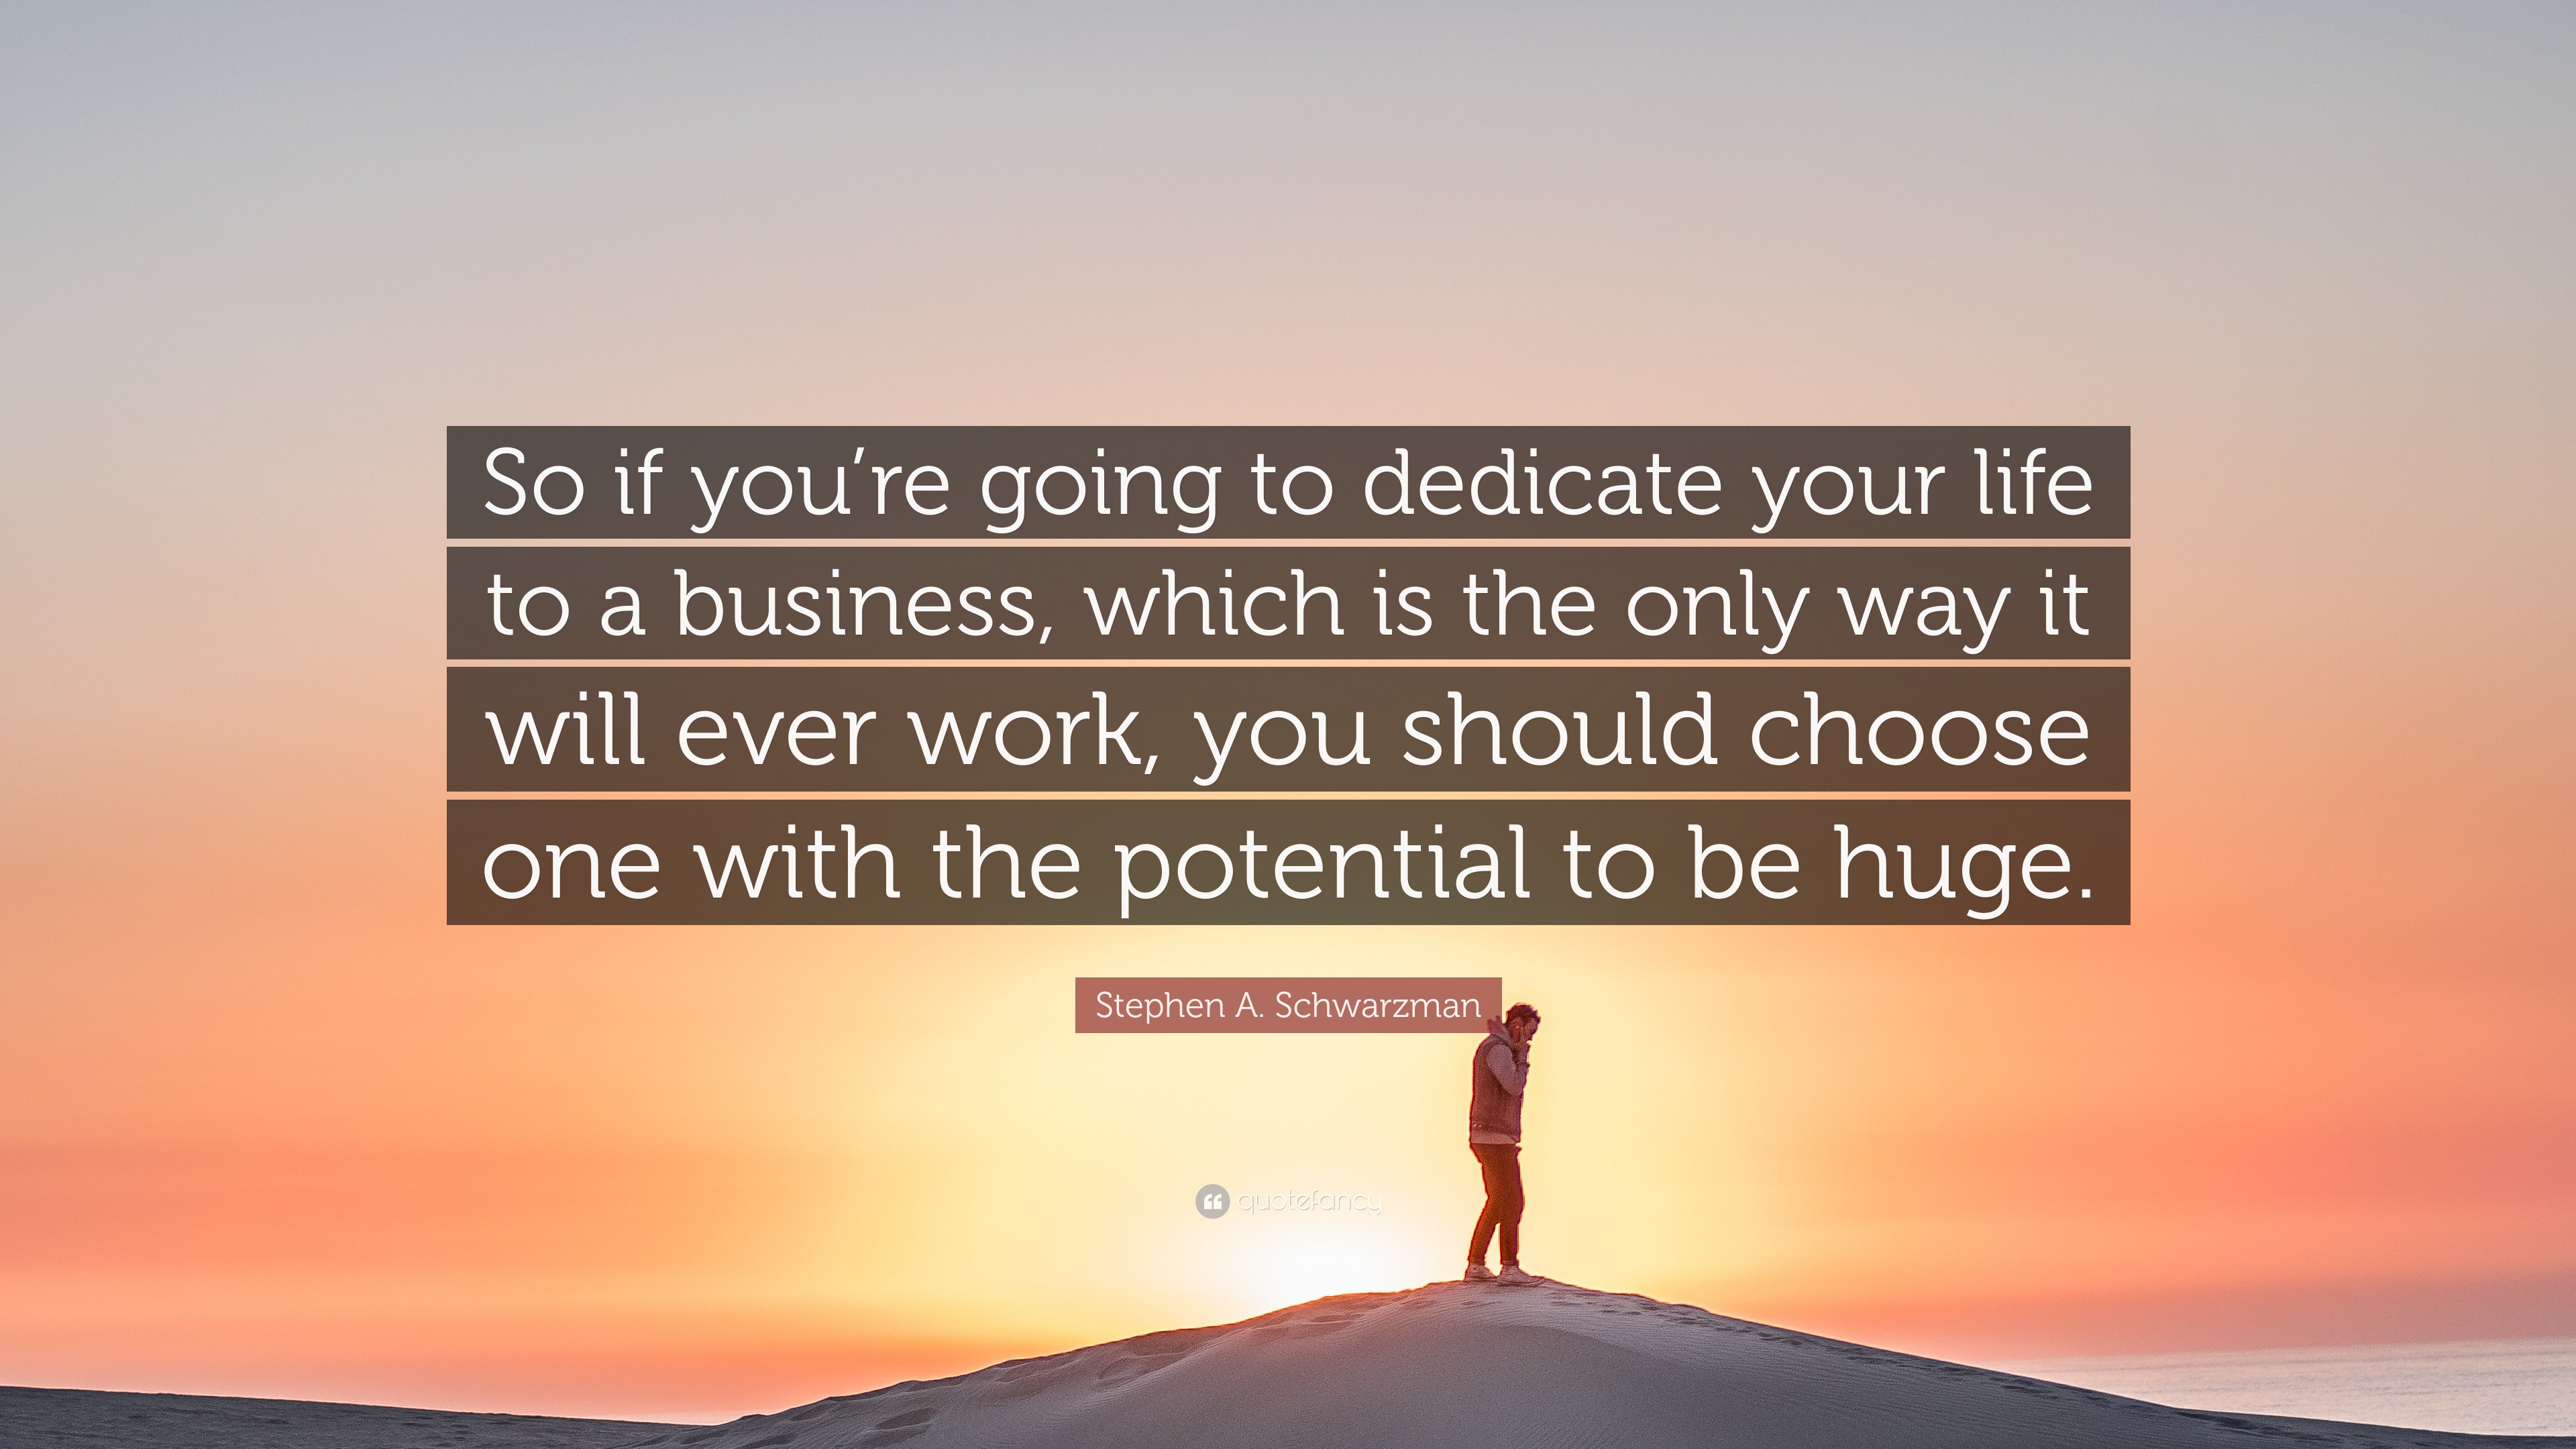 Stephen A. Schwarzman Quote: “So if you’re going to dedicate your life ...